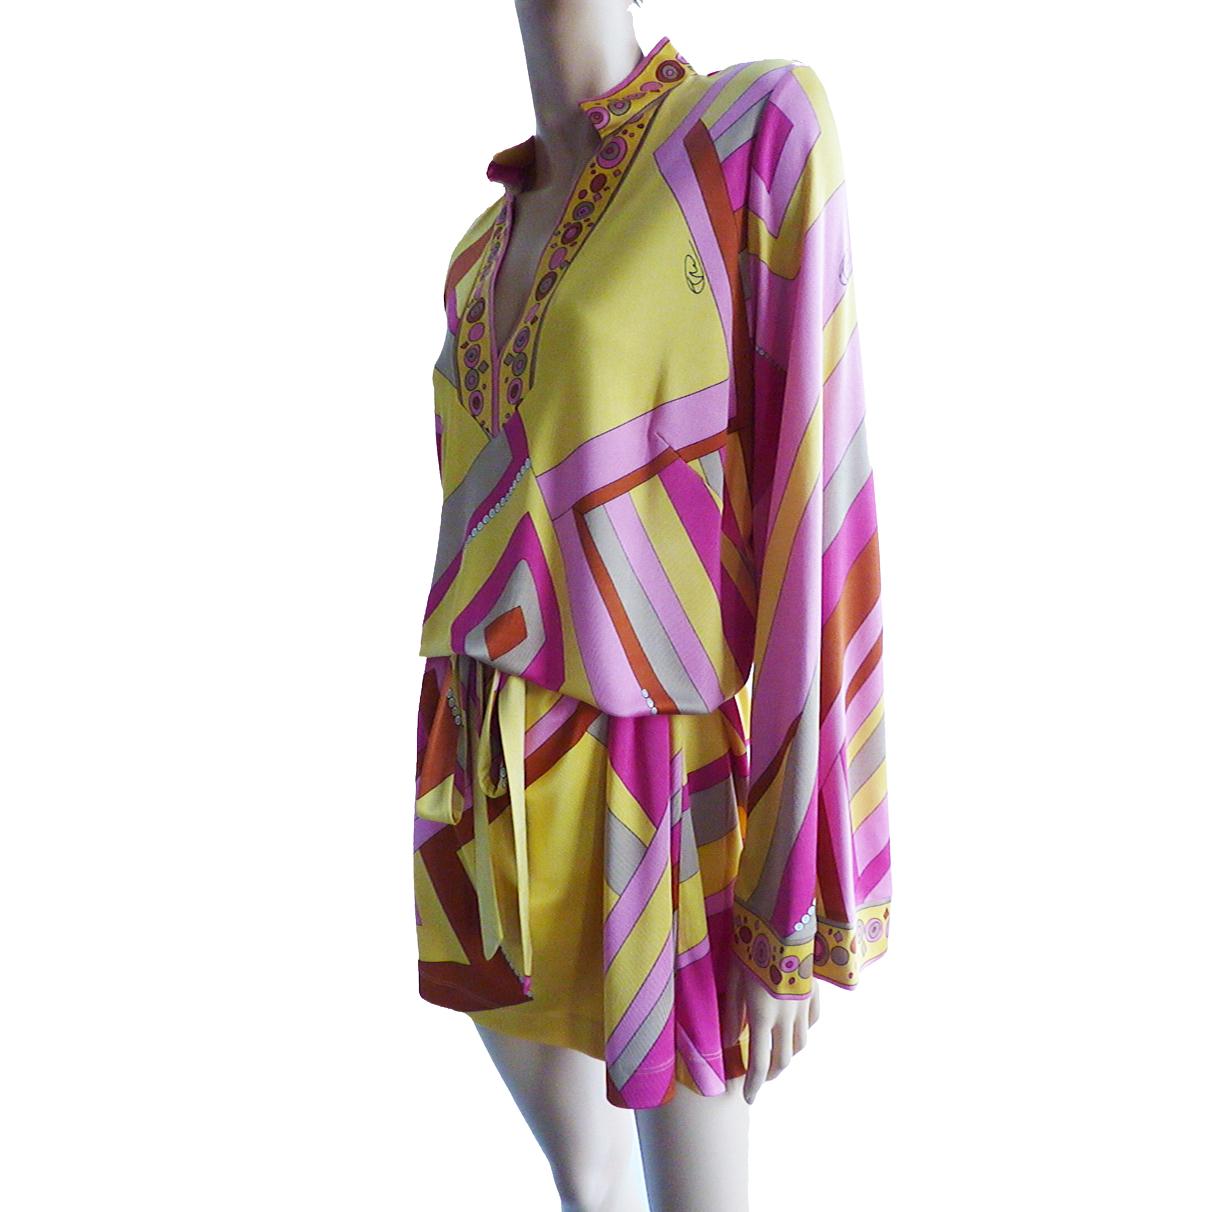 Flattering split collar tunic dress with flared sleeves,
Original deco print with mixed print collar and sleeve band.
Approximately 41